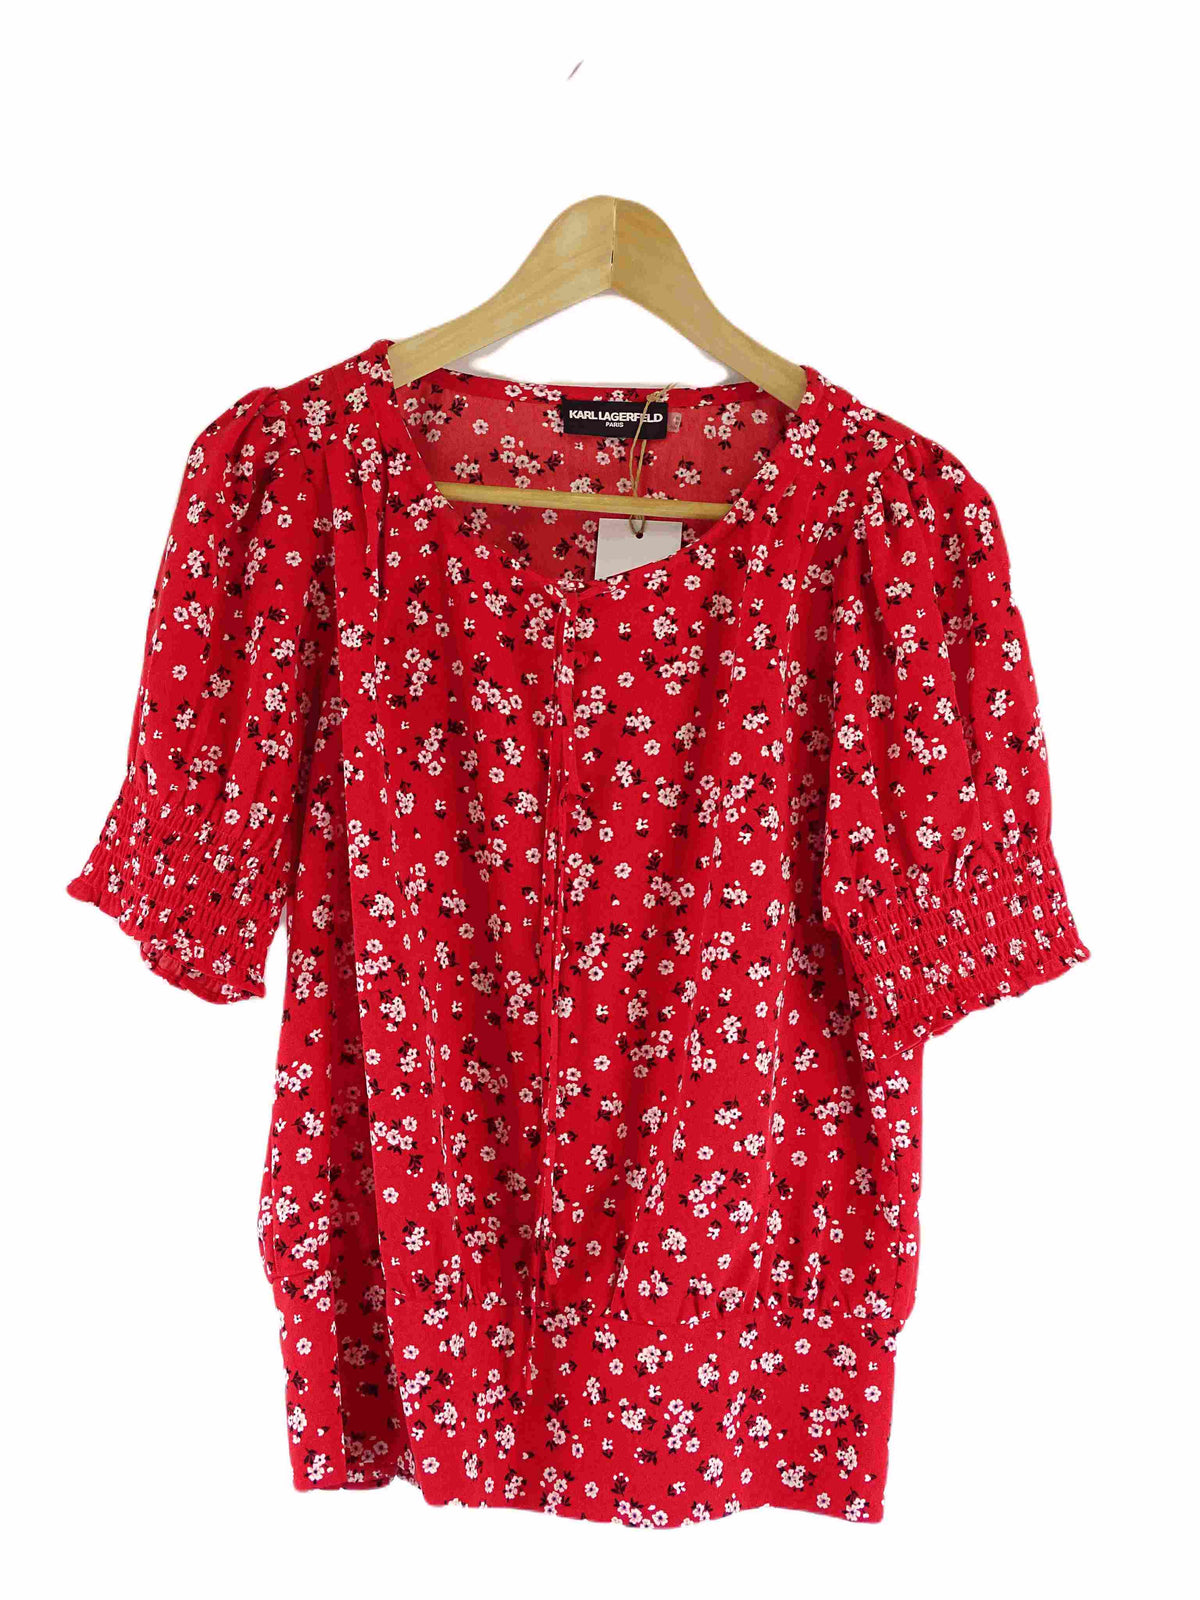 Karl Lagerfeld Red Floral Top S